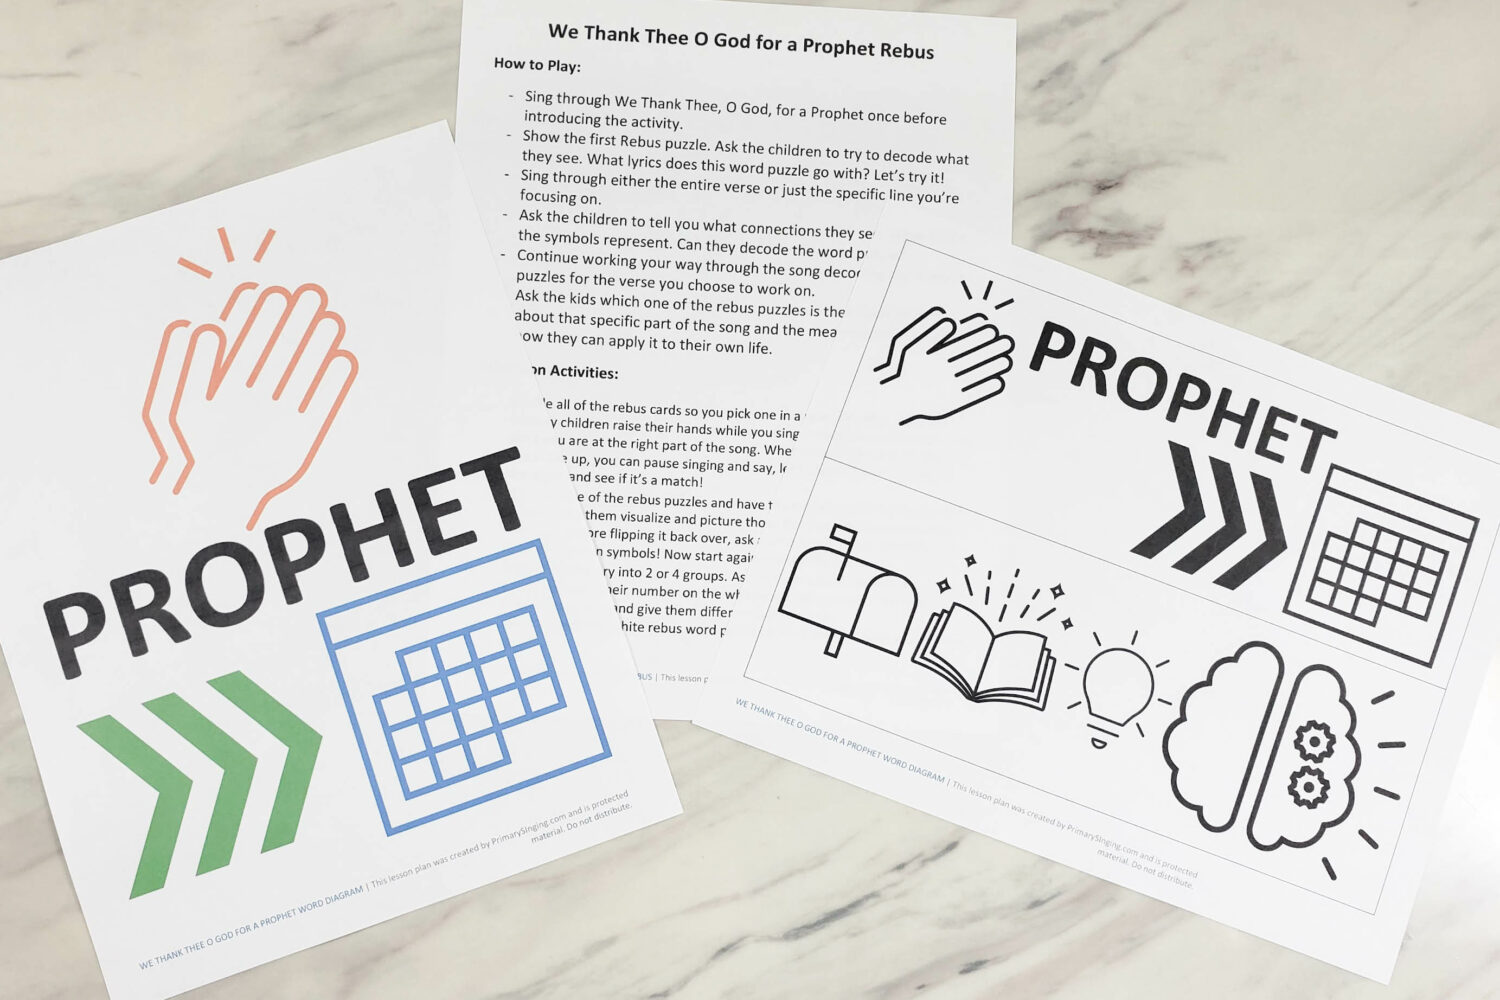 We Thank Thee O God for a Prophet Rebus fun word puzzle singing time idea for LDS Primary Music Leaders. Have the kids help you decode the puzzle and help teach the lyrics to this hymn! Including printable song helps in 2 sizes!